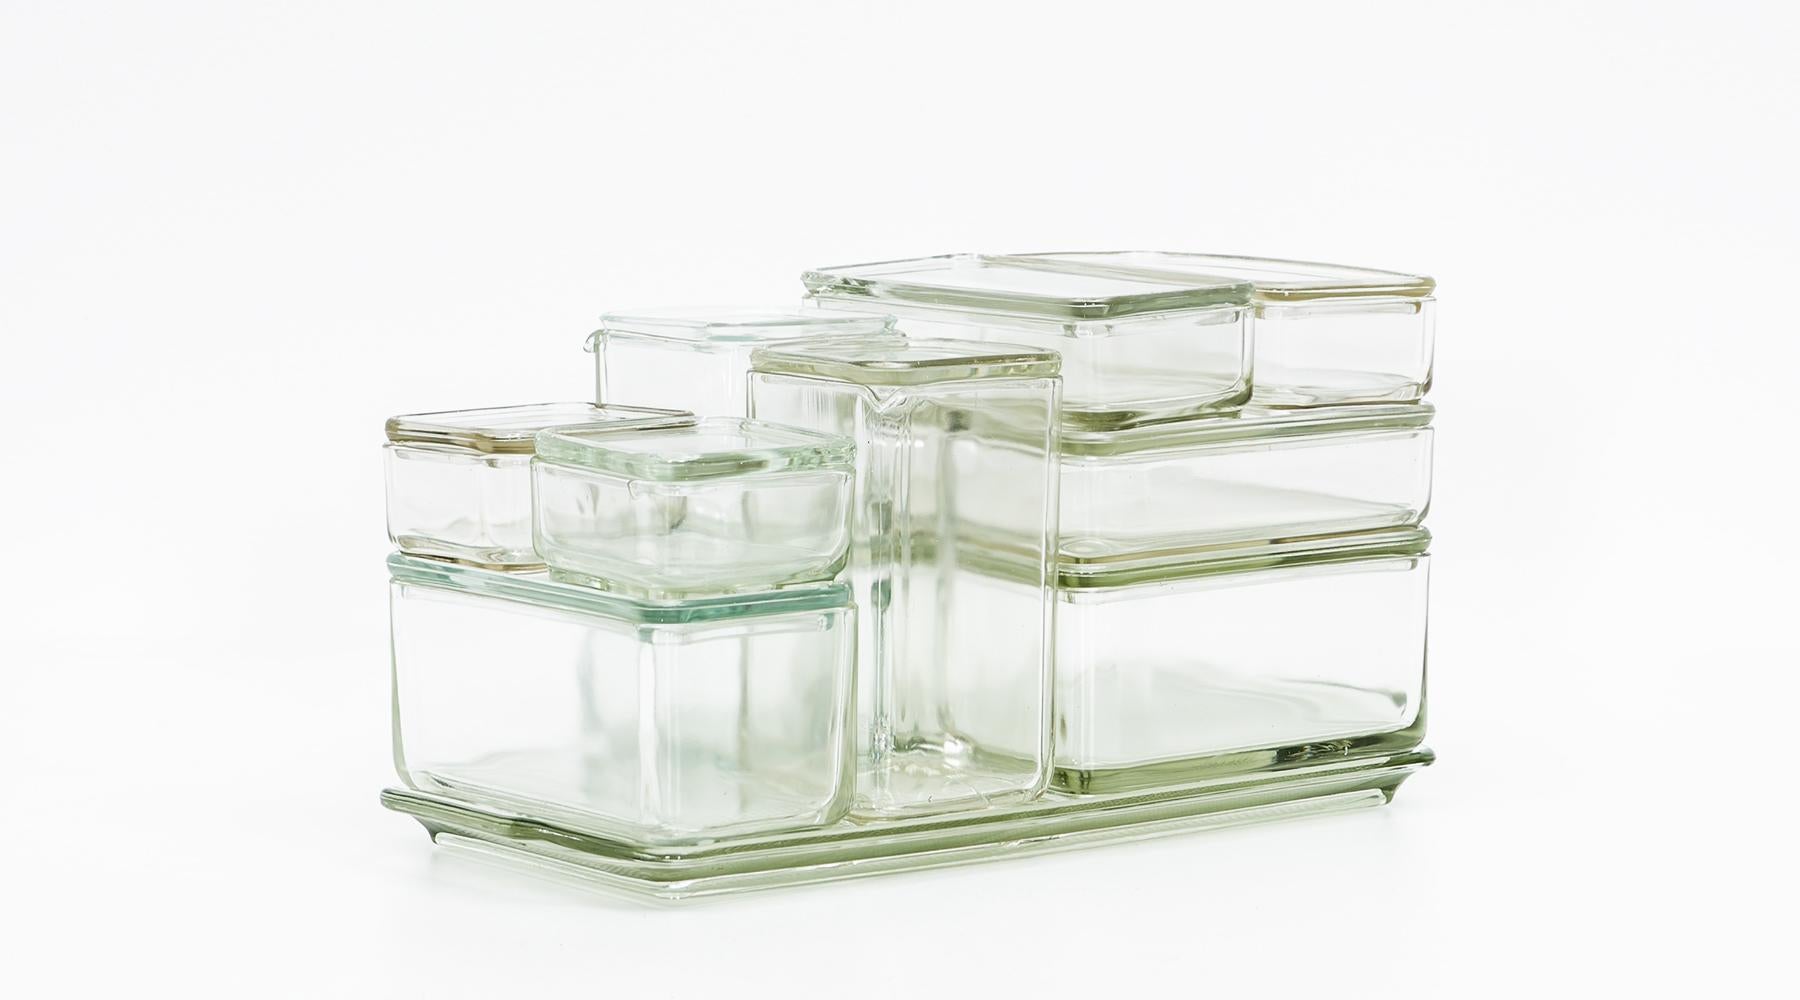 Kubus, storage container, glass, stackable with top, Wilhelm Wagenfeld, Germany, 1938

The famous storage container set for food by Wilhelm Wagenfeld. It is a design from circa 1938, an early version. All 10 containers come with a top and are